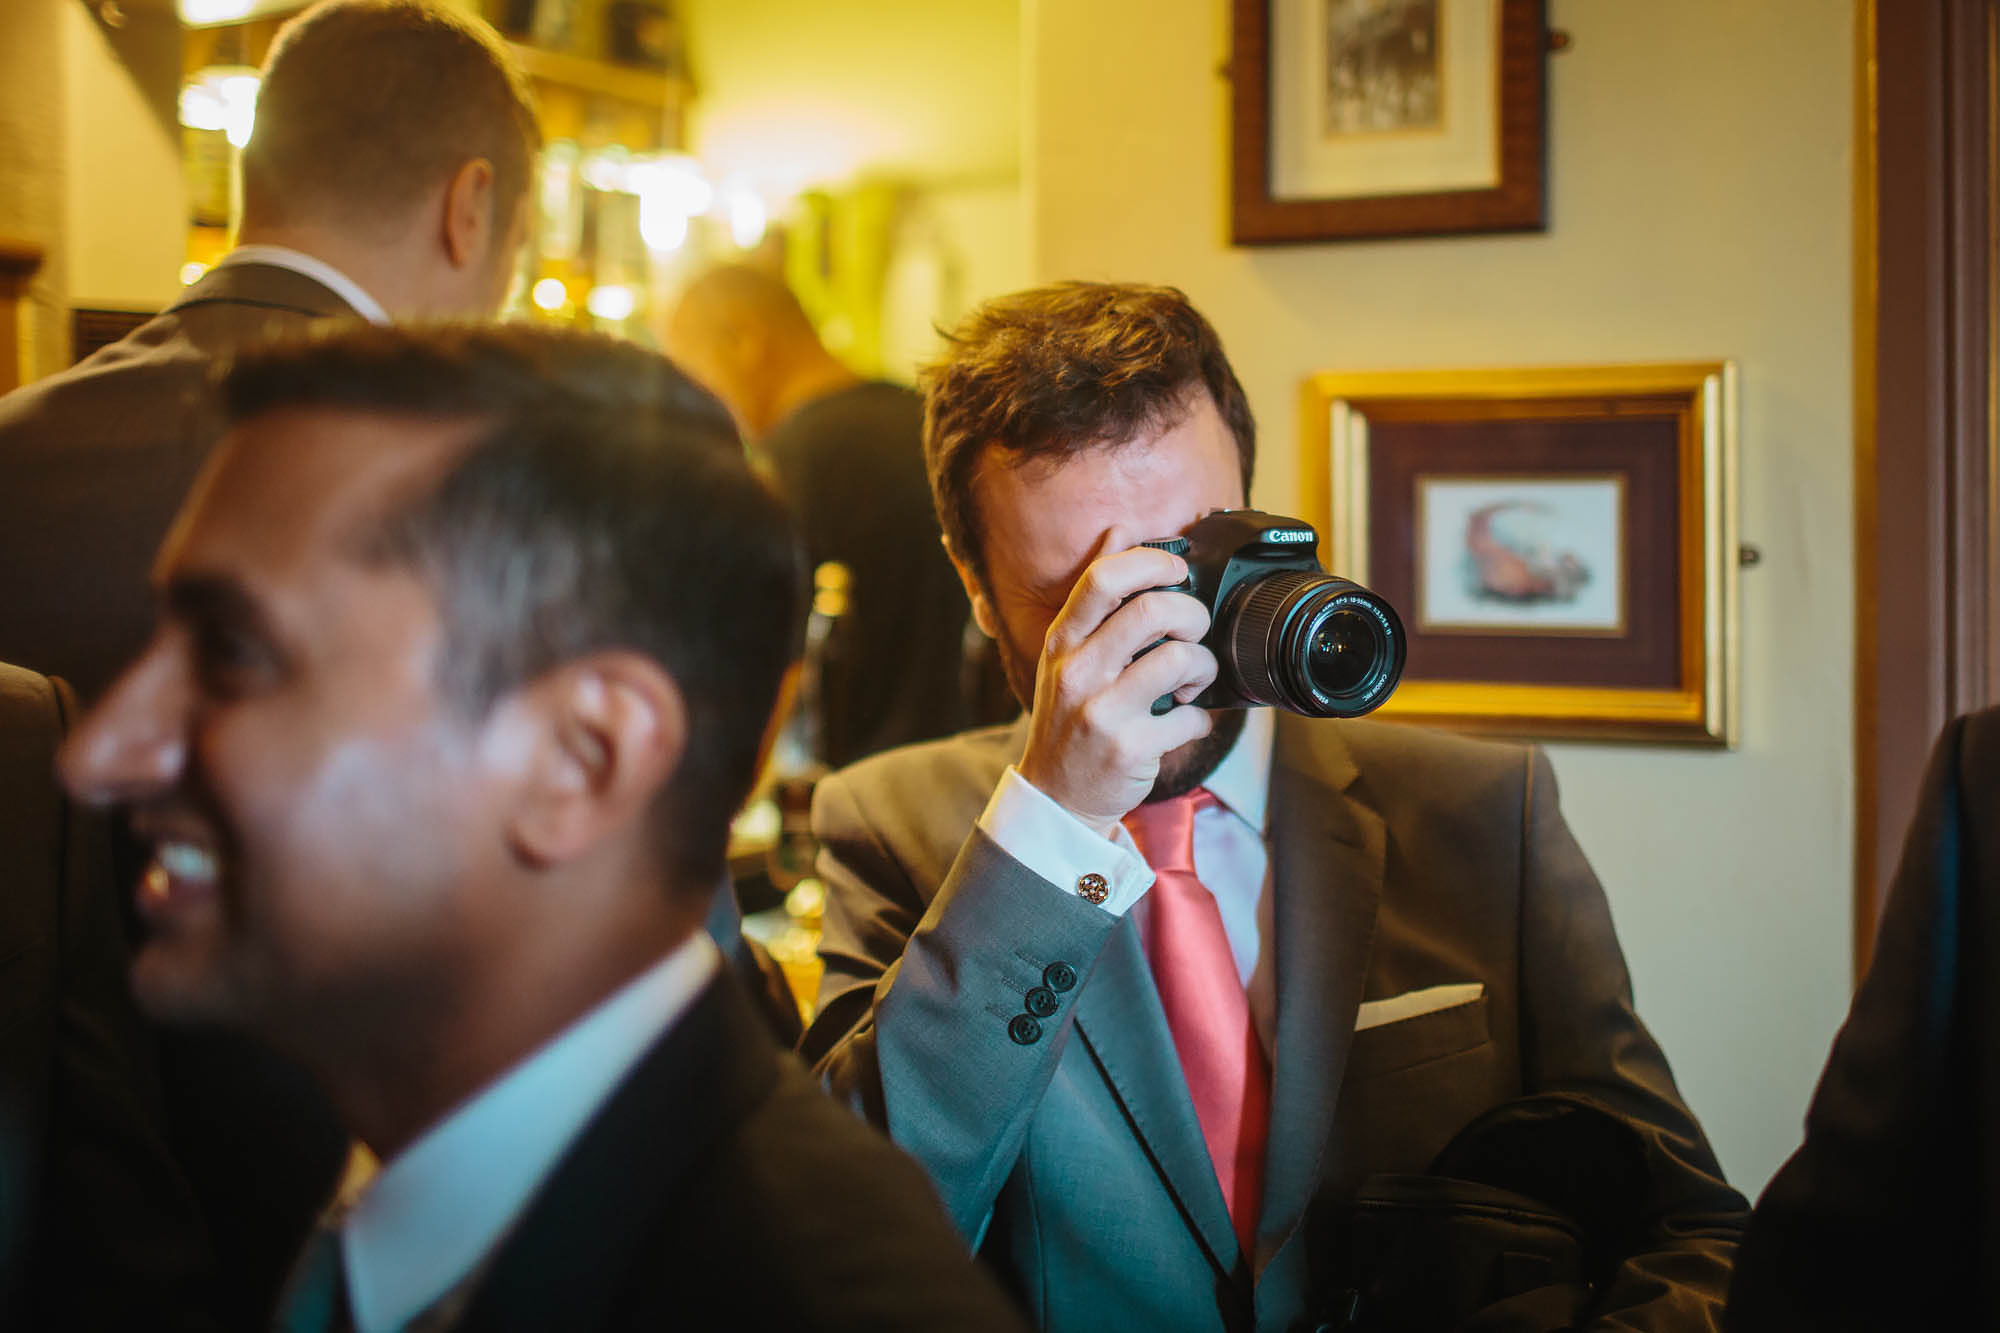 Best man taking photographs with a camera on the wedding day